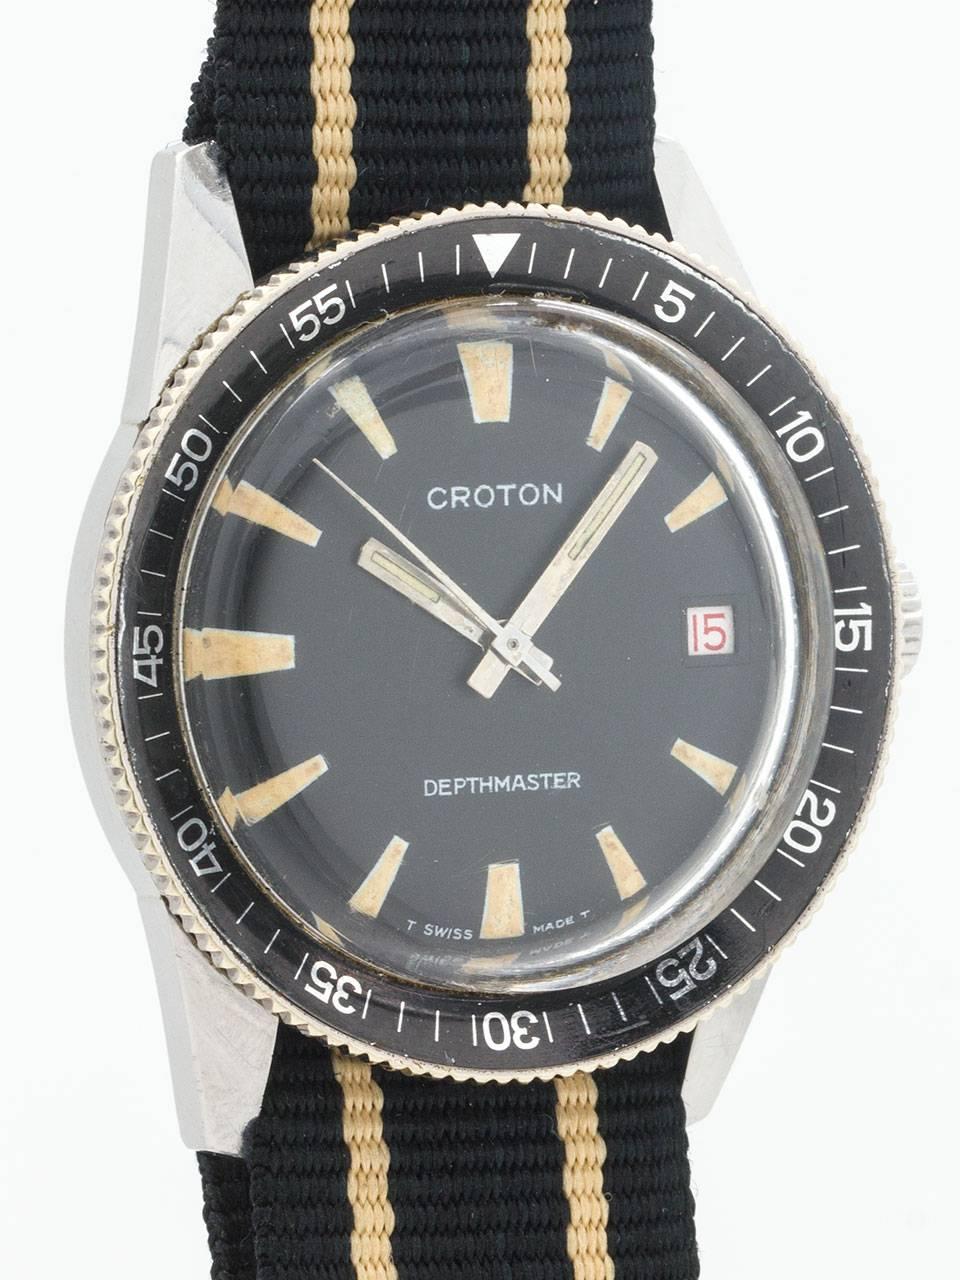 Vintage Croton diver’s model circa 1960’s. Featuring 35mm diameter case with bi-directional elapsed time bezel with acrylic crystal, and with original matte black dial with large tapered luminous indexes and match stick hands. Powered by self